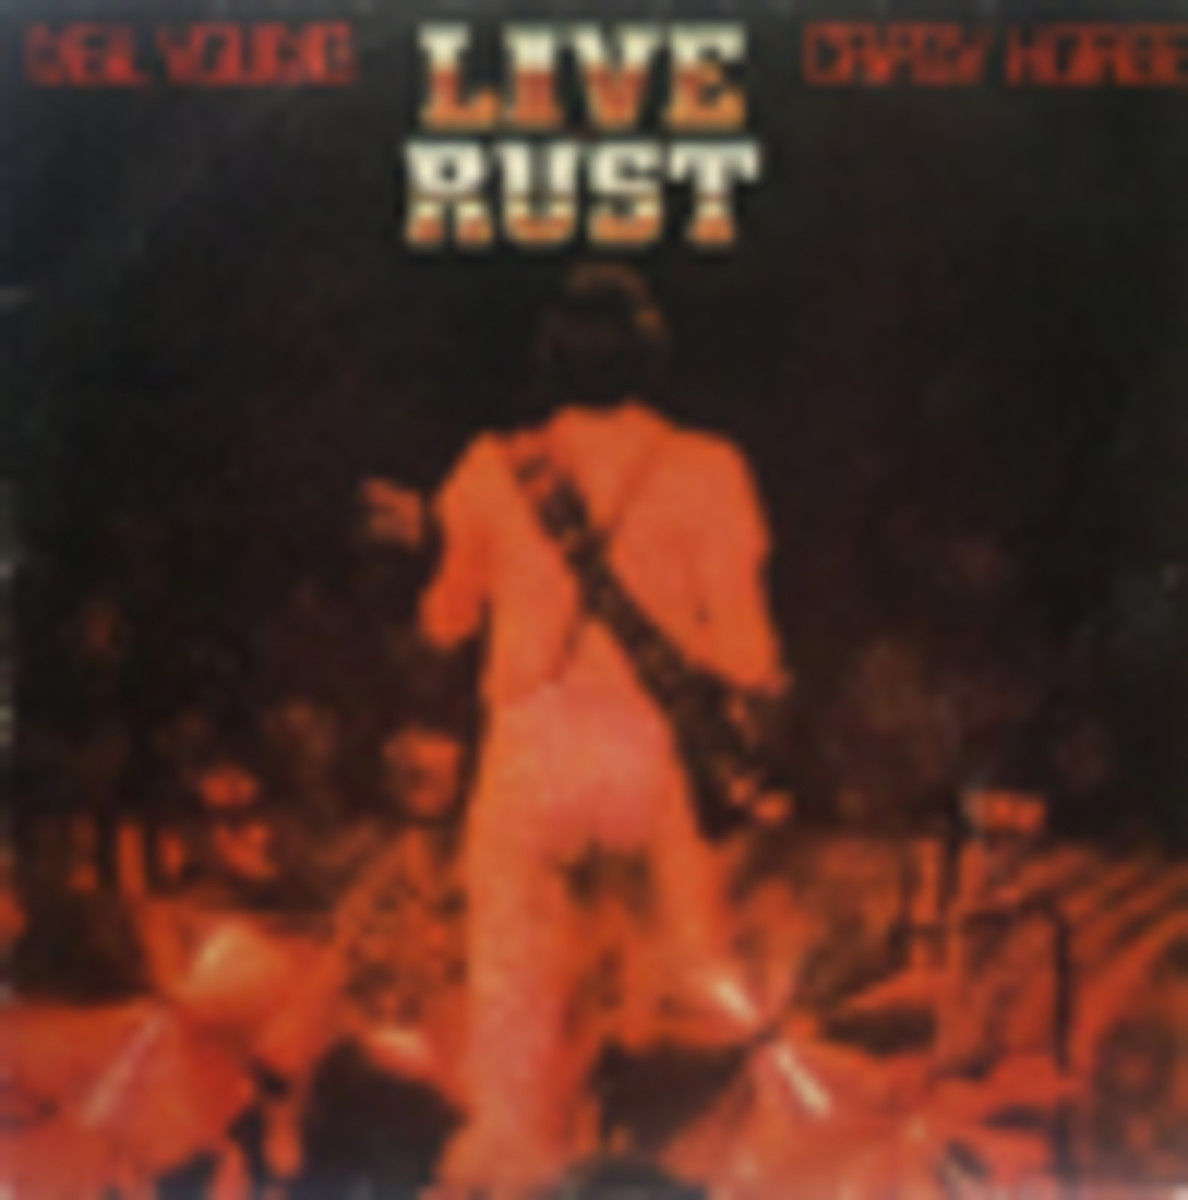 Neil Young and Crazy Horse Live Rust